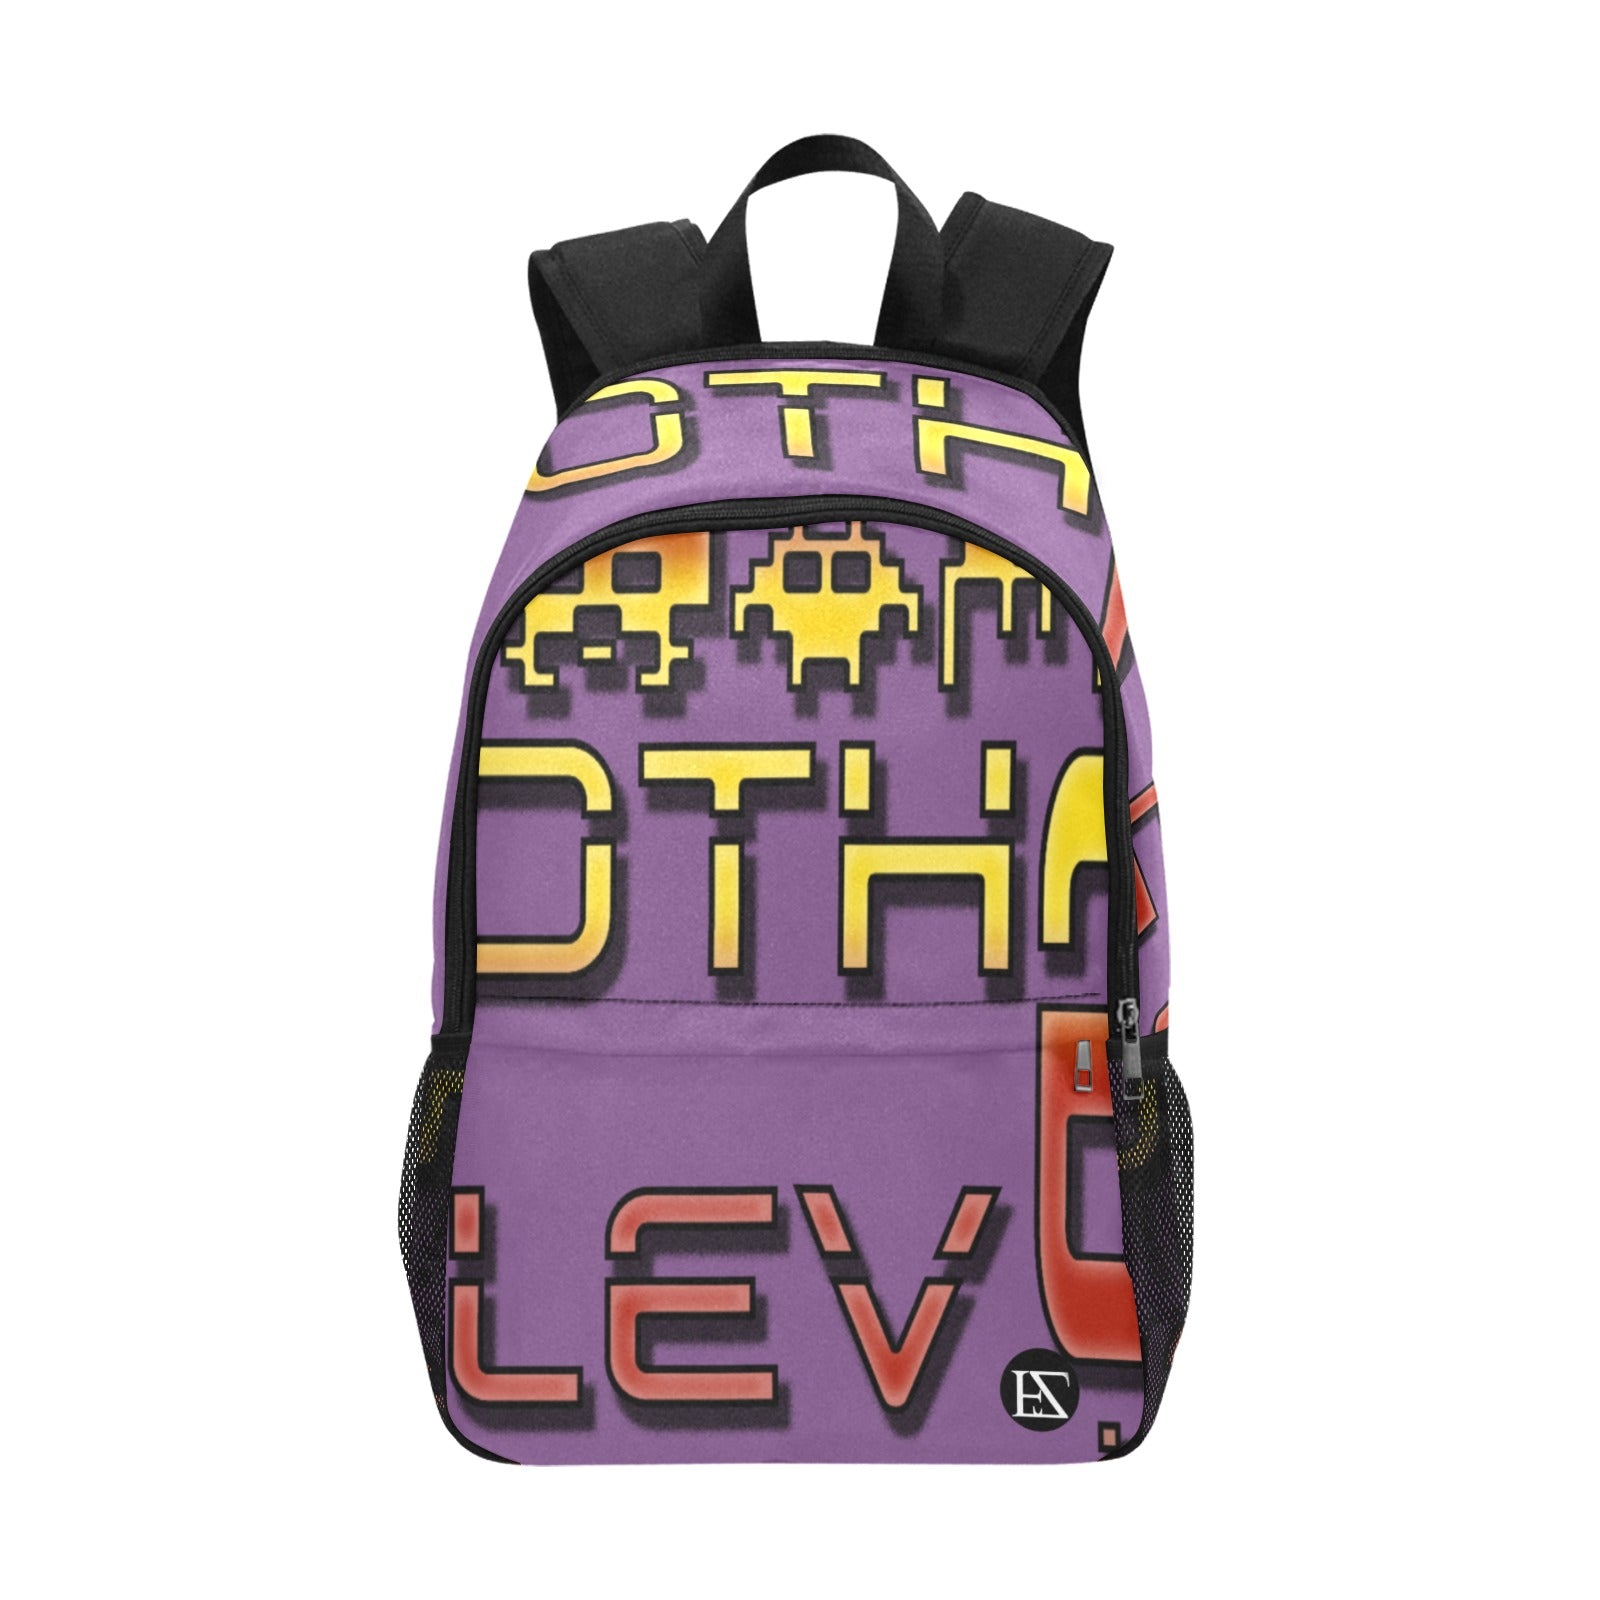 fz red levels backpack one size / fz levels backpack - purple all-over print unisex casual backpack with side mesh pockets (model 1659)